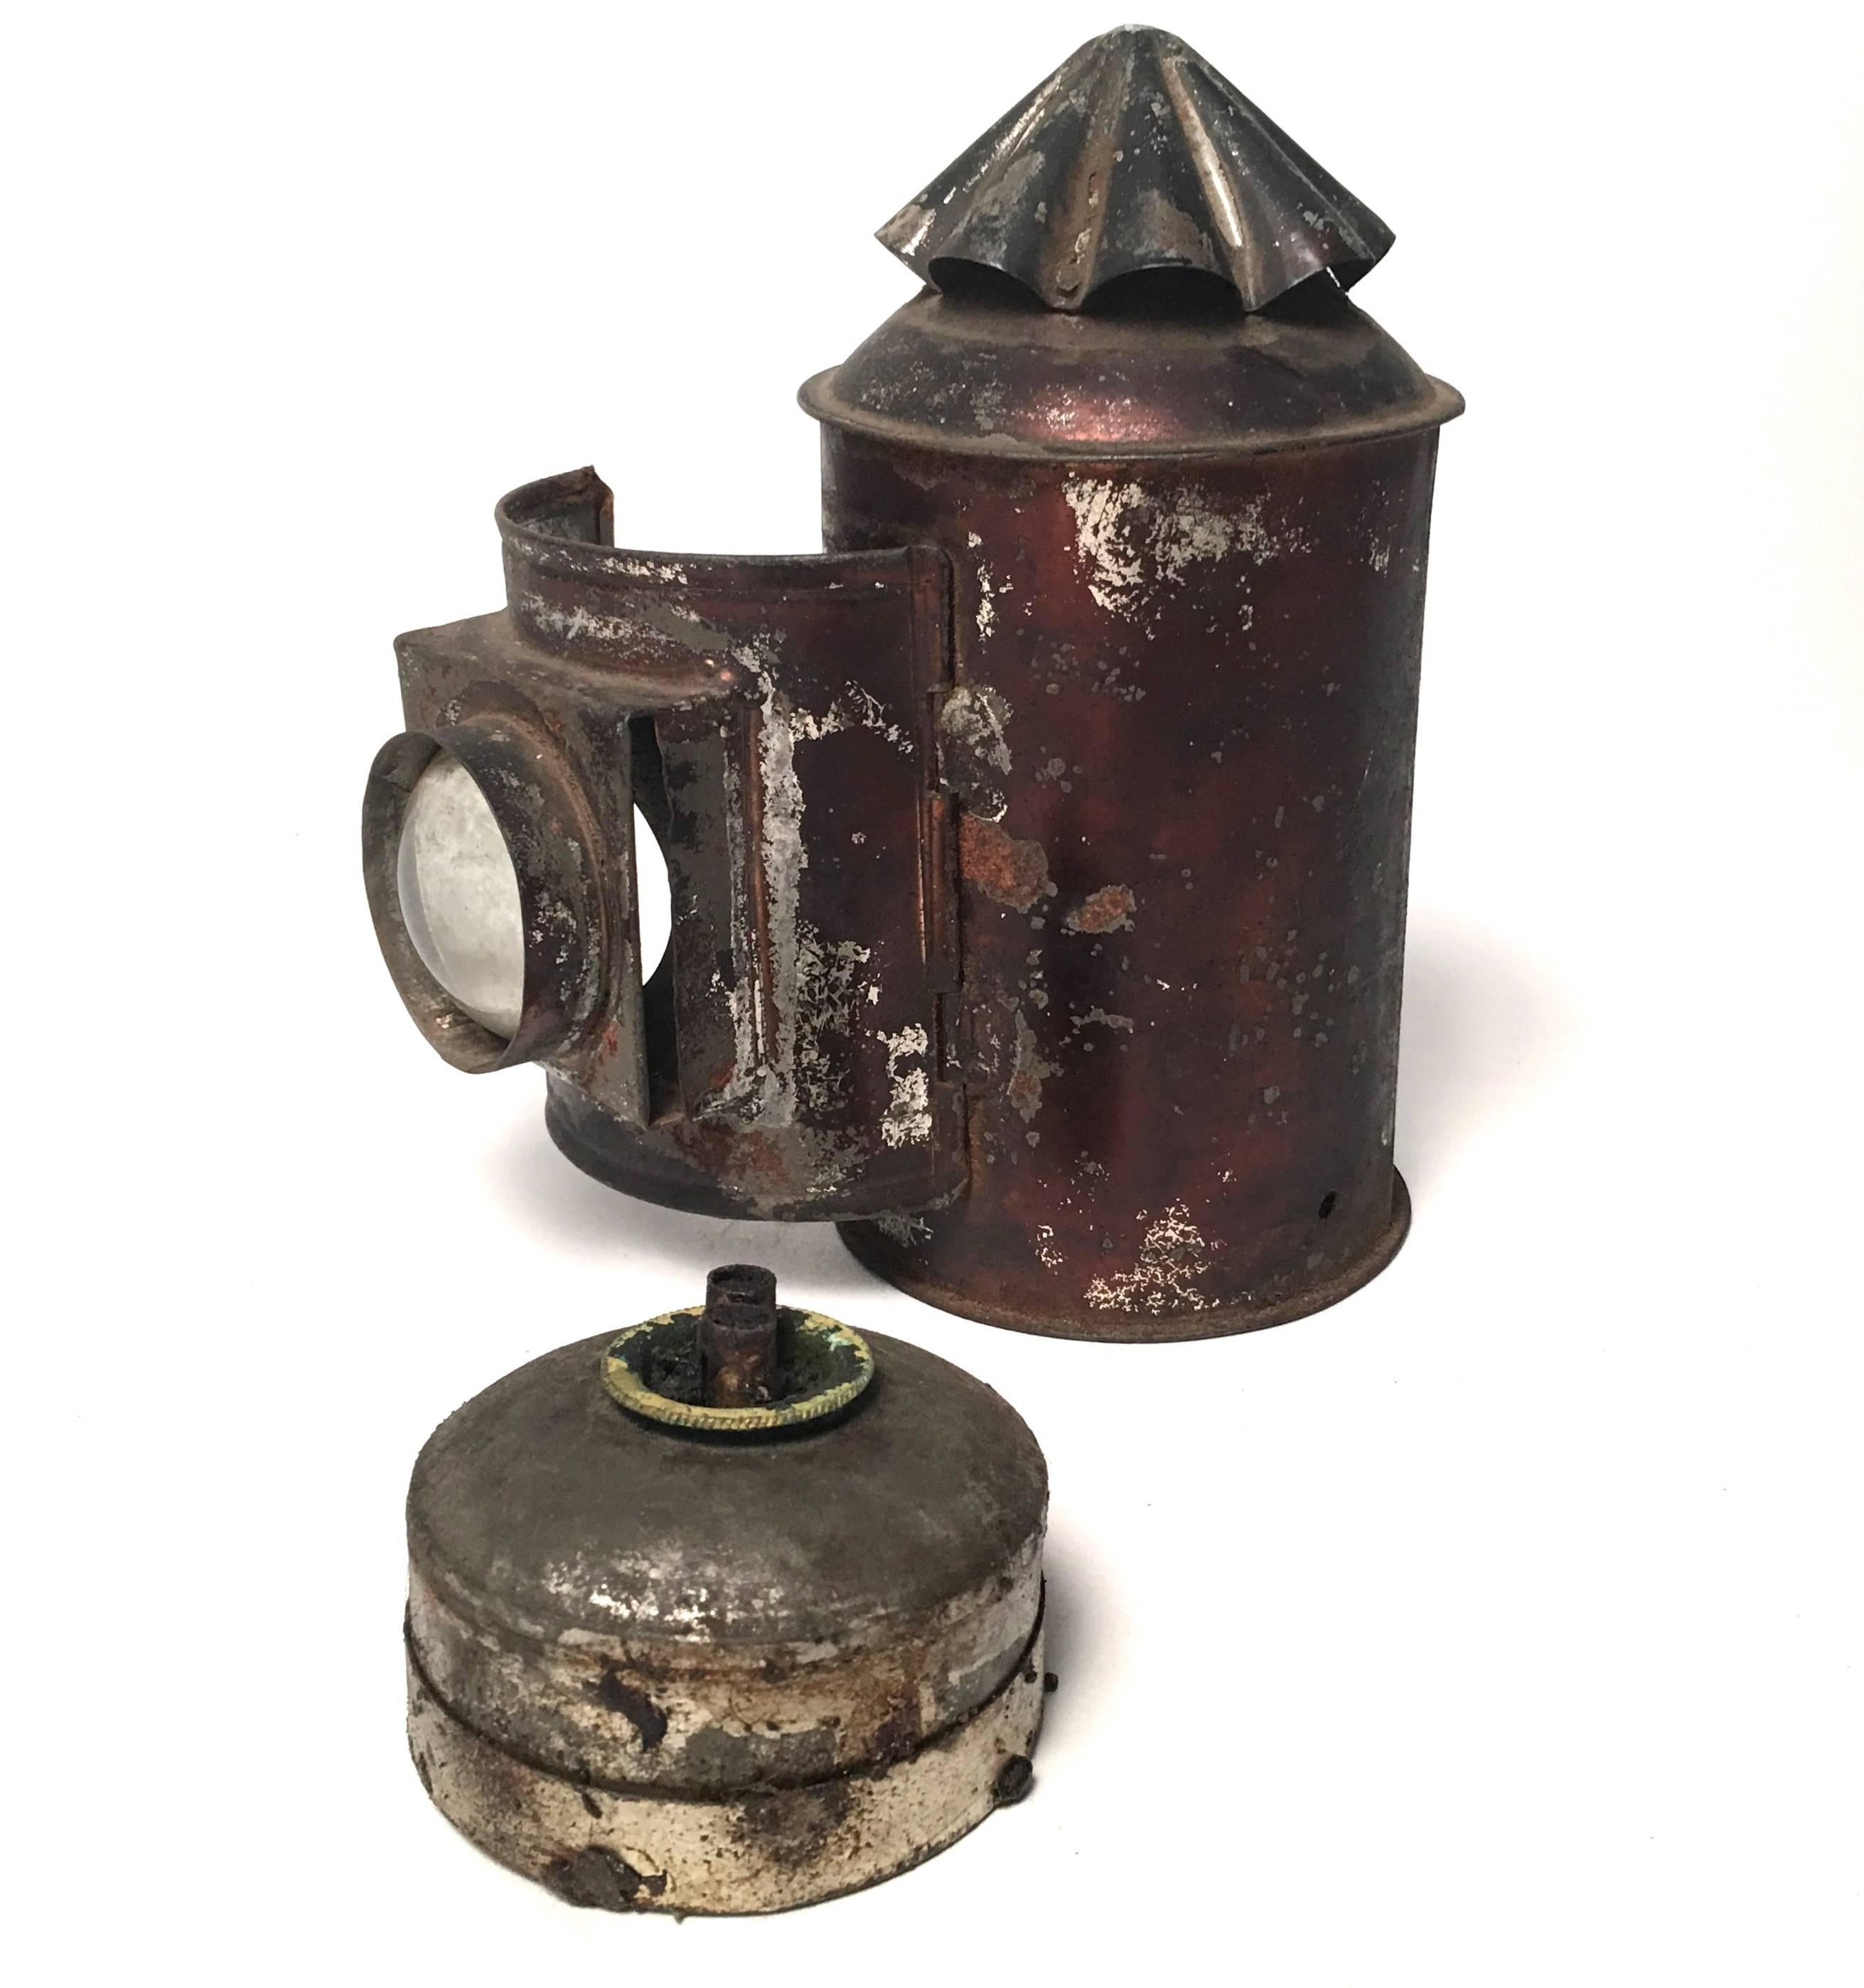 A wonderfully preserved and well made tin whale oil lantern from New England, the conical ribbed top with vents, over a cylindrical base with door, embedded with magnifying glass lens, opening to reveal the original removable whale oil canister. A